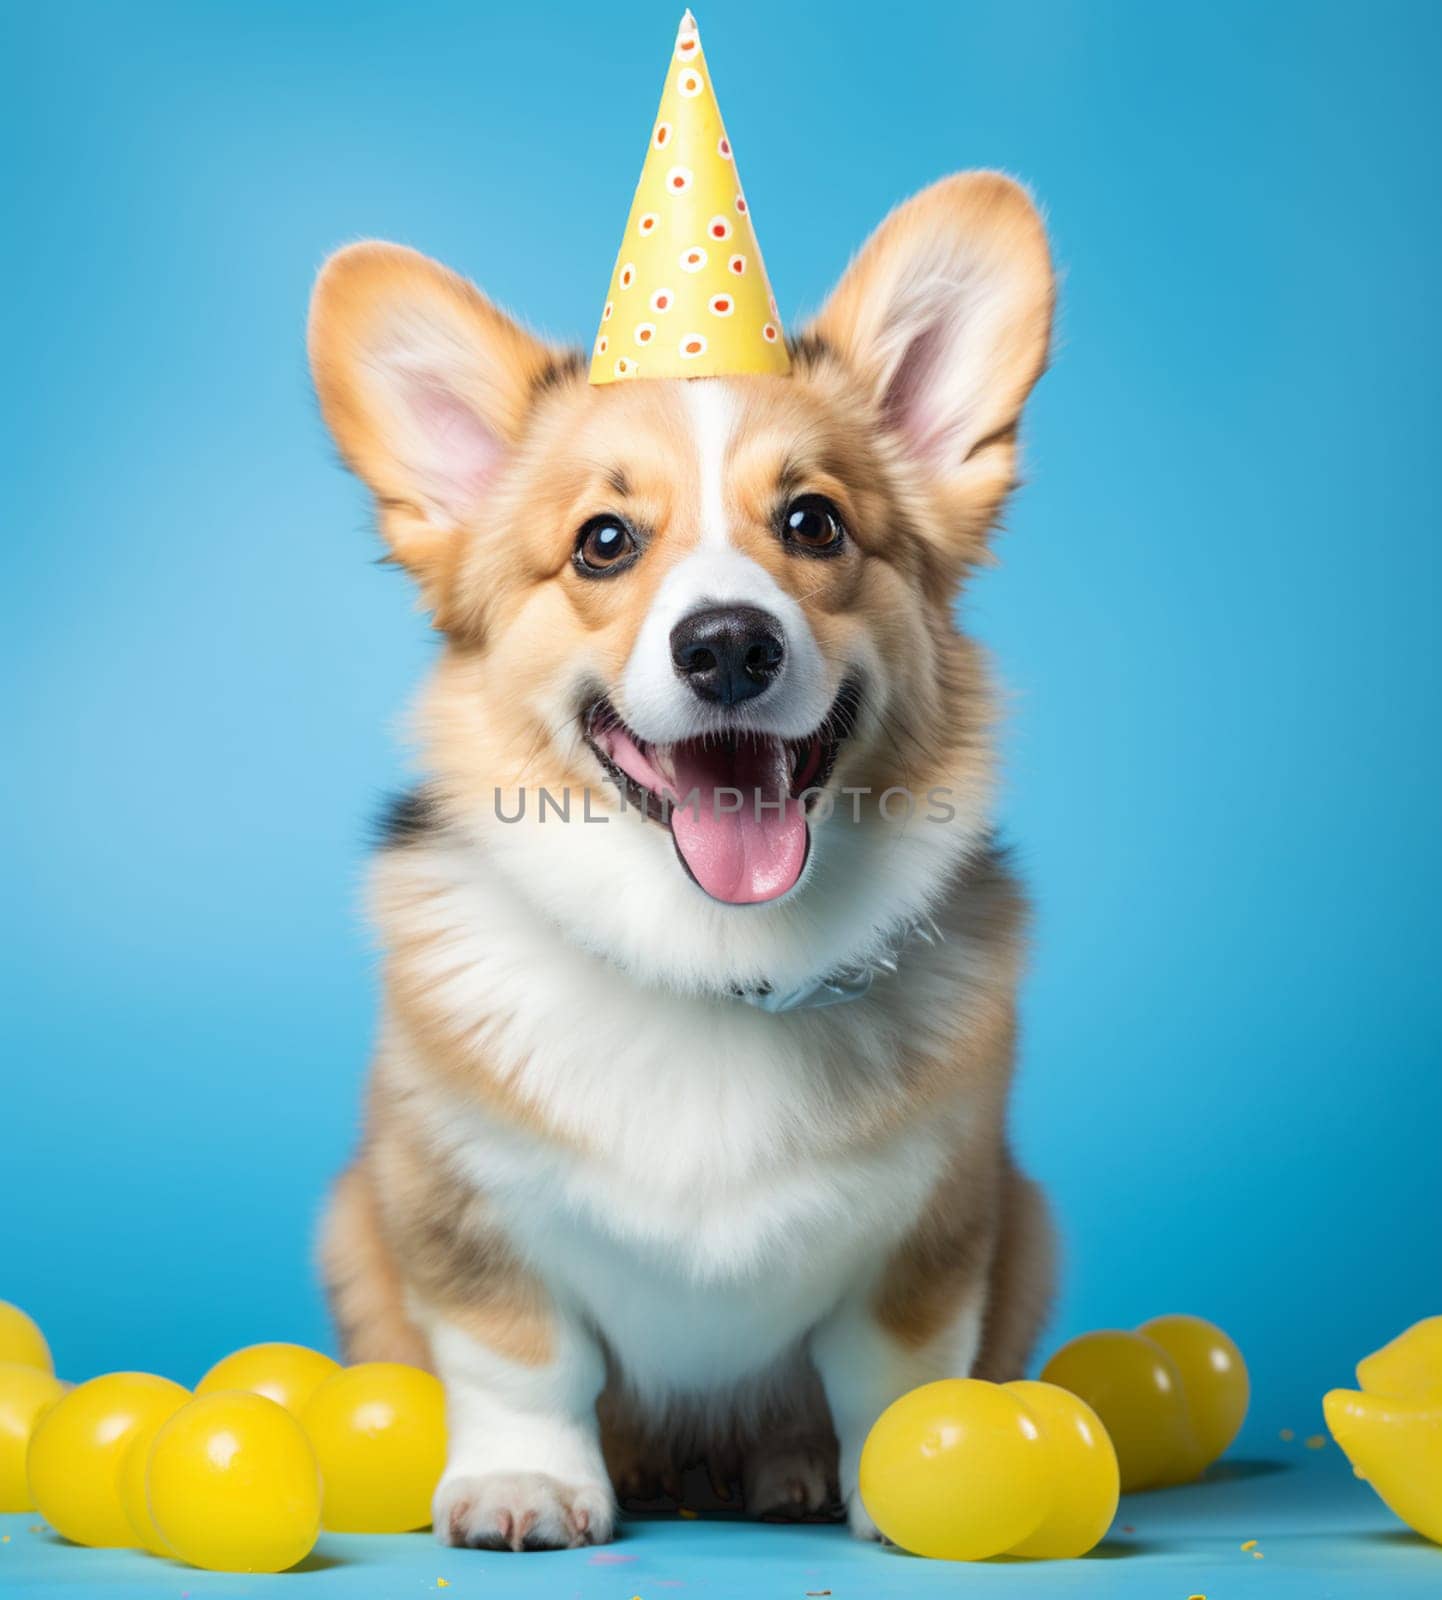 Dog in a Party Hat by Andelov13